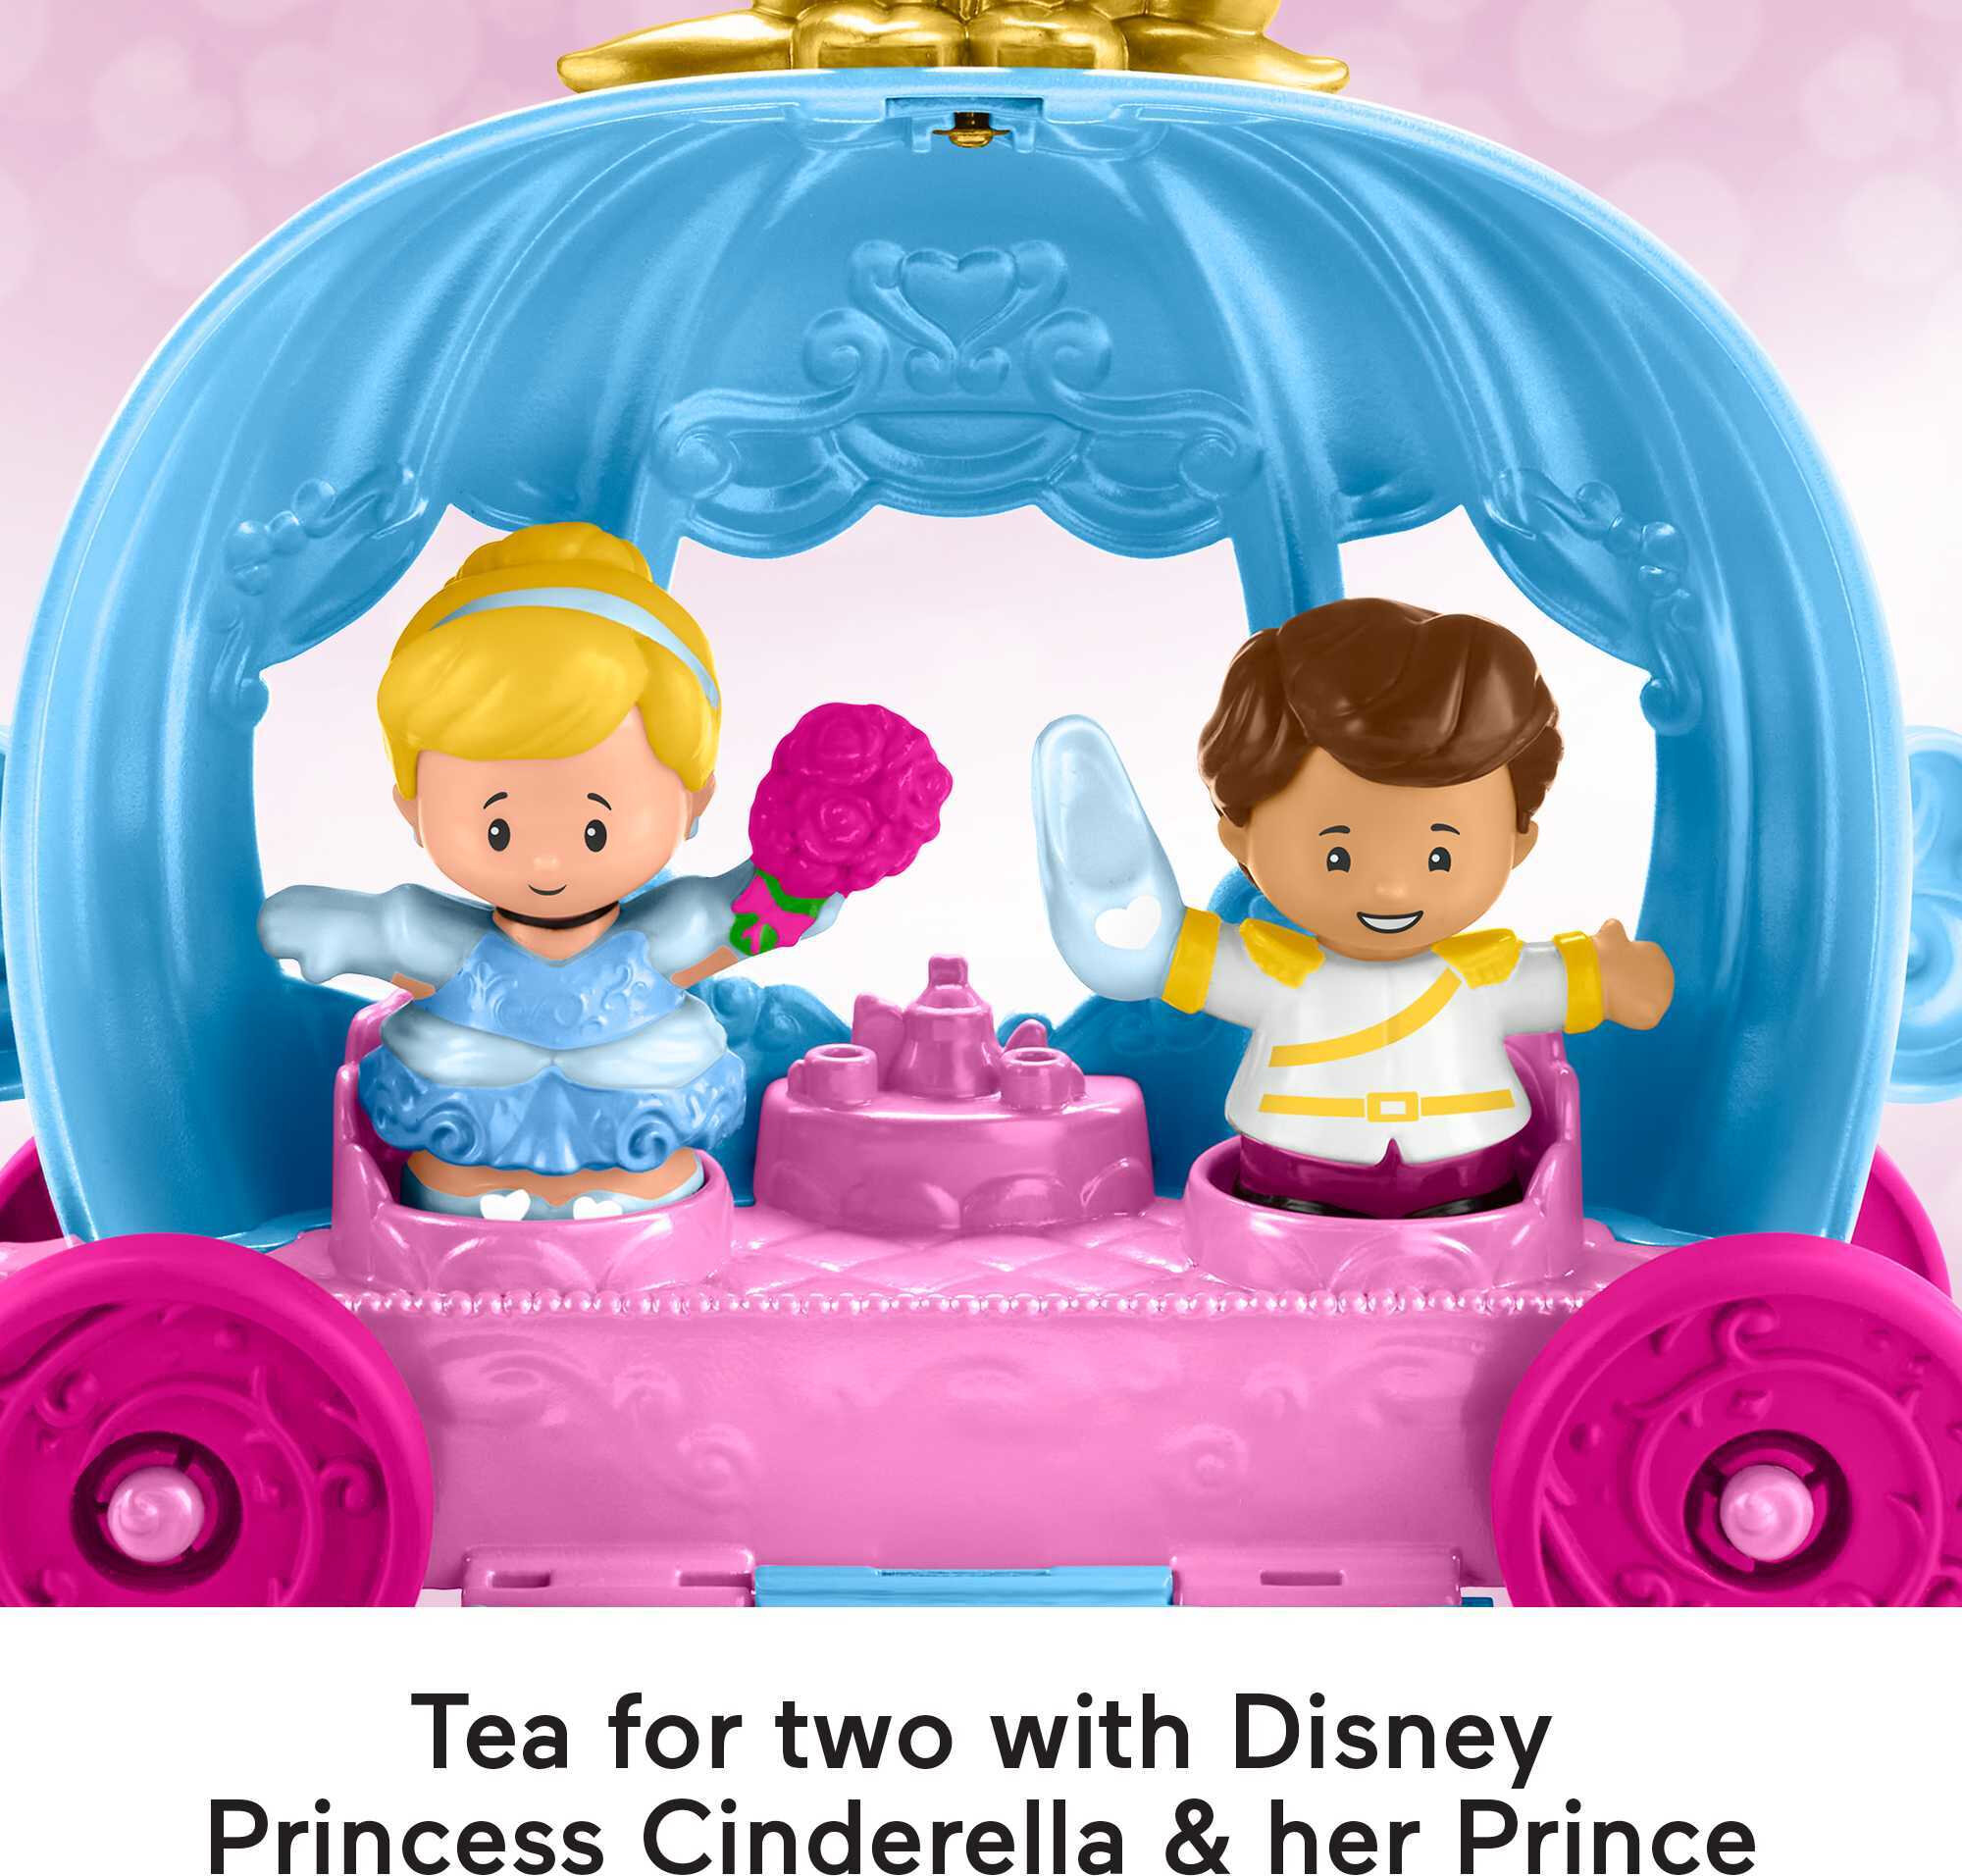 Disney Princess Cinderella’s Dancing Carriage Little People Toddler Playset with Horse & Figures - image 4 of 6